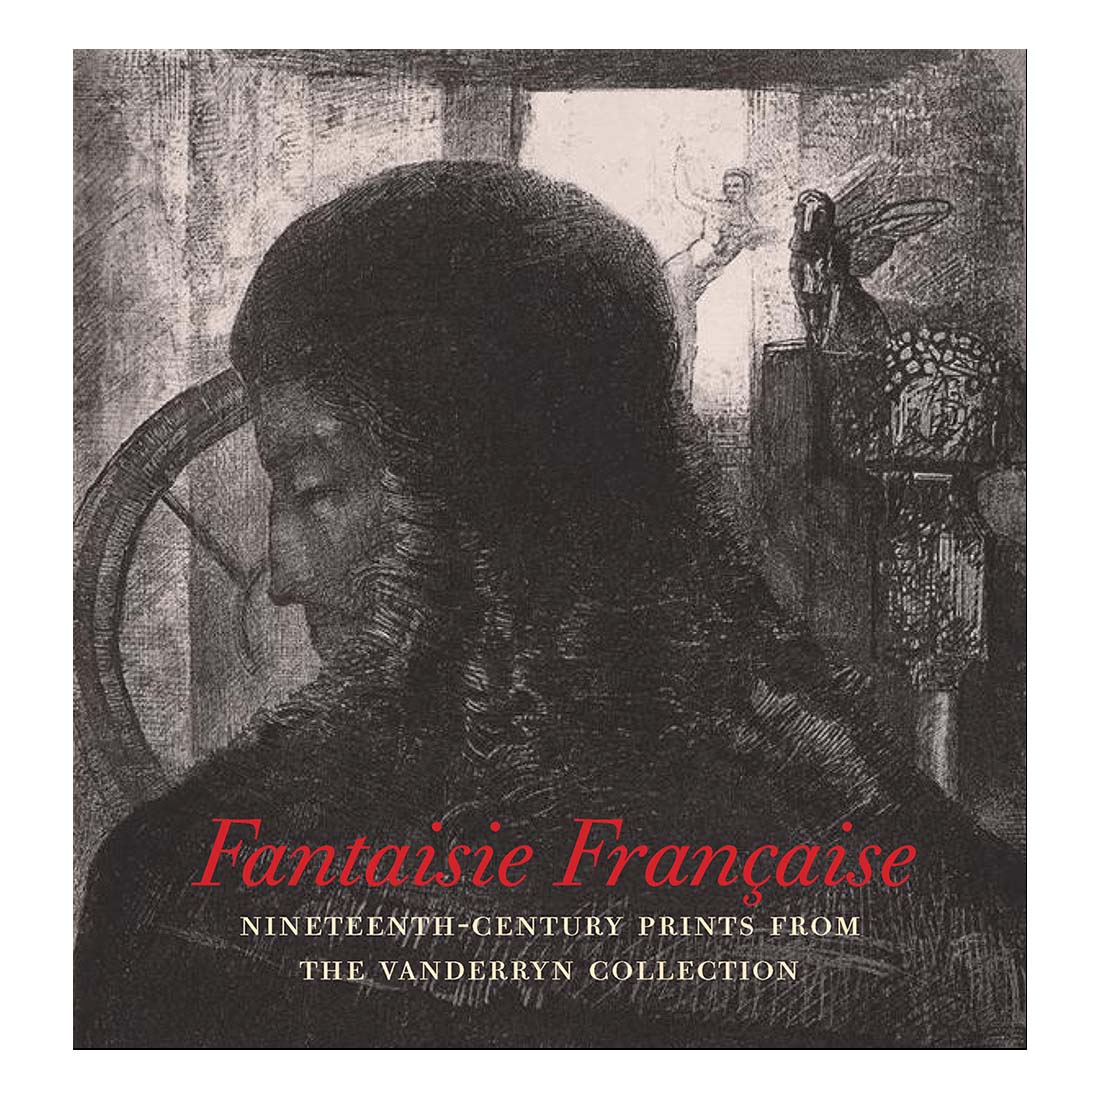 Fantaisie Franҫaise: Prints from the Vanderryn Collection